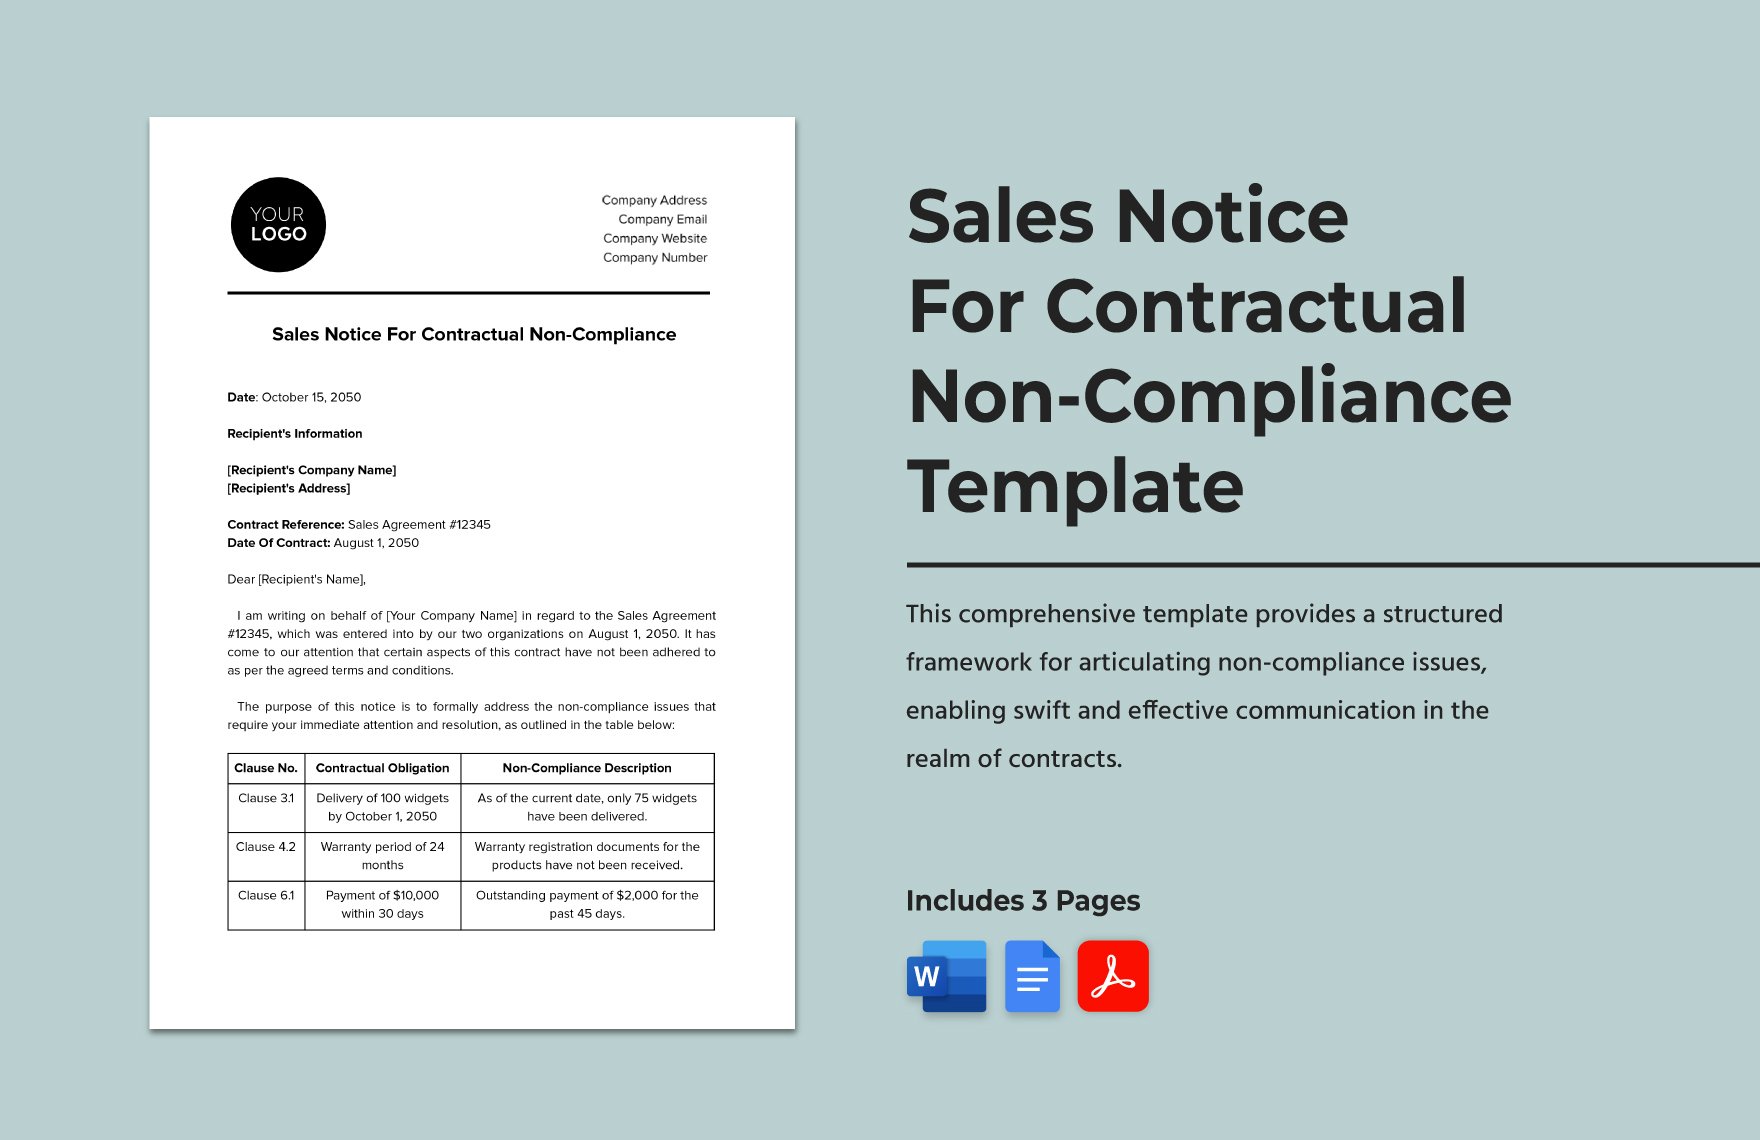 Sales Notice For Contractual Non-Compliance Template in Word, Google Docs, PDF